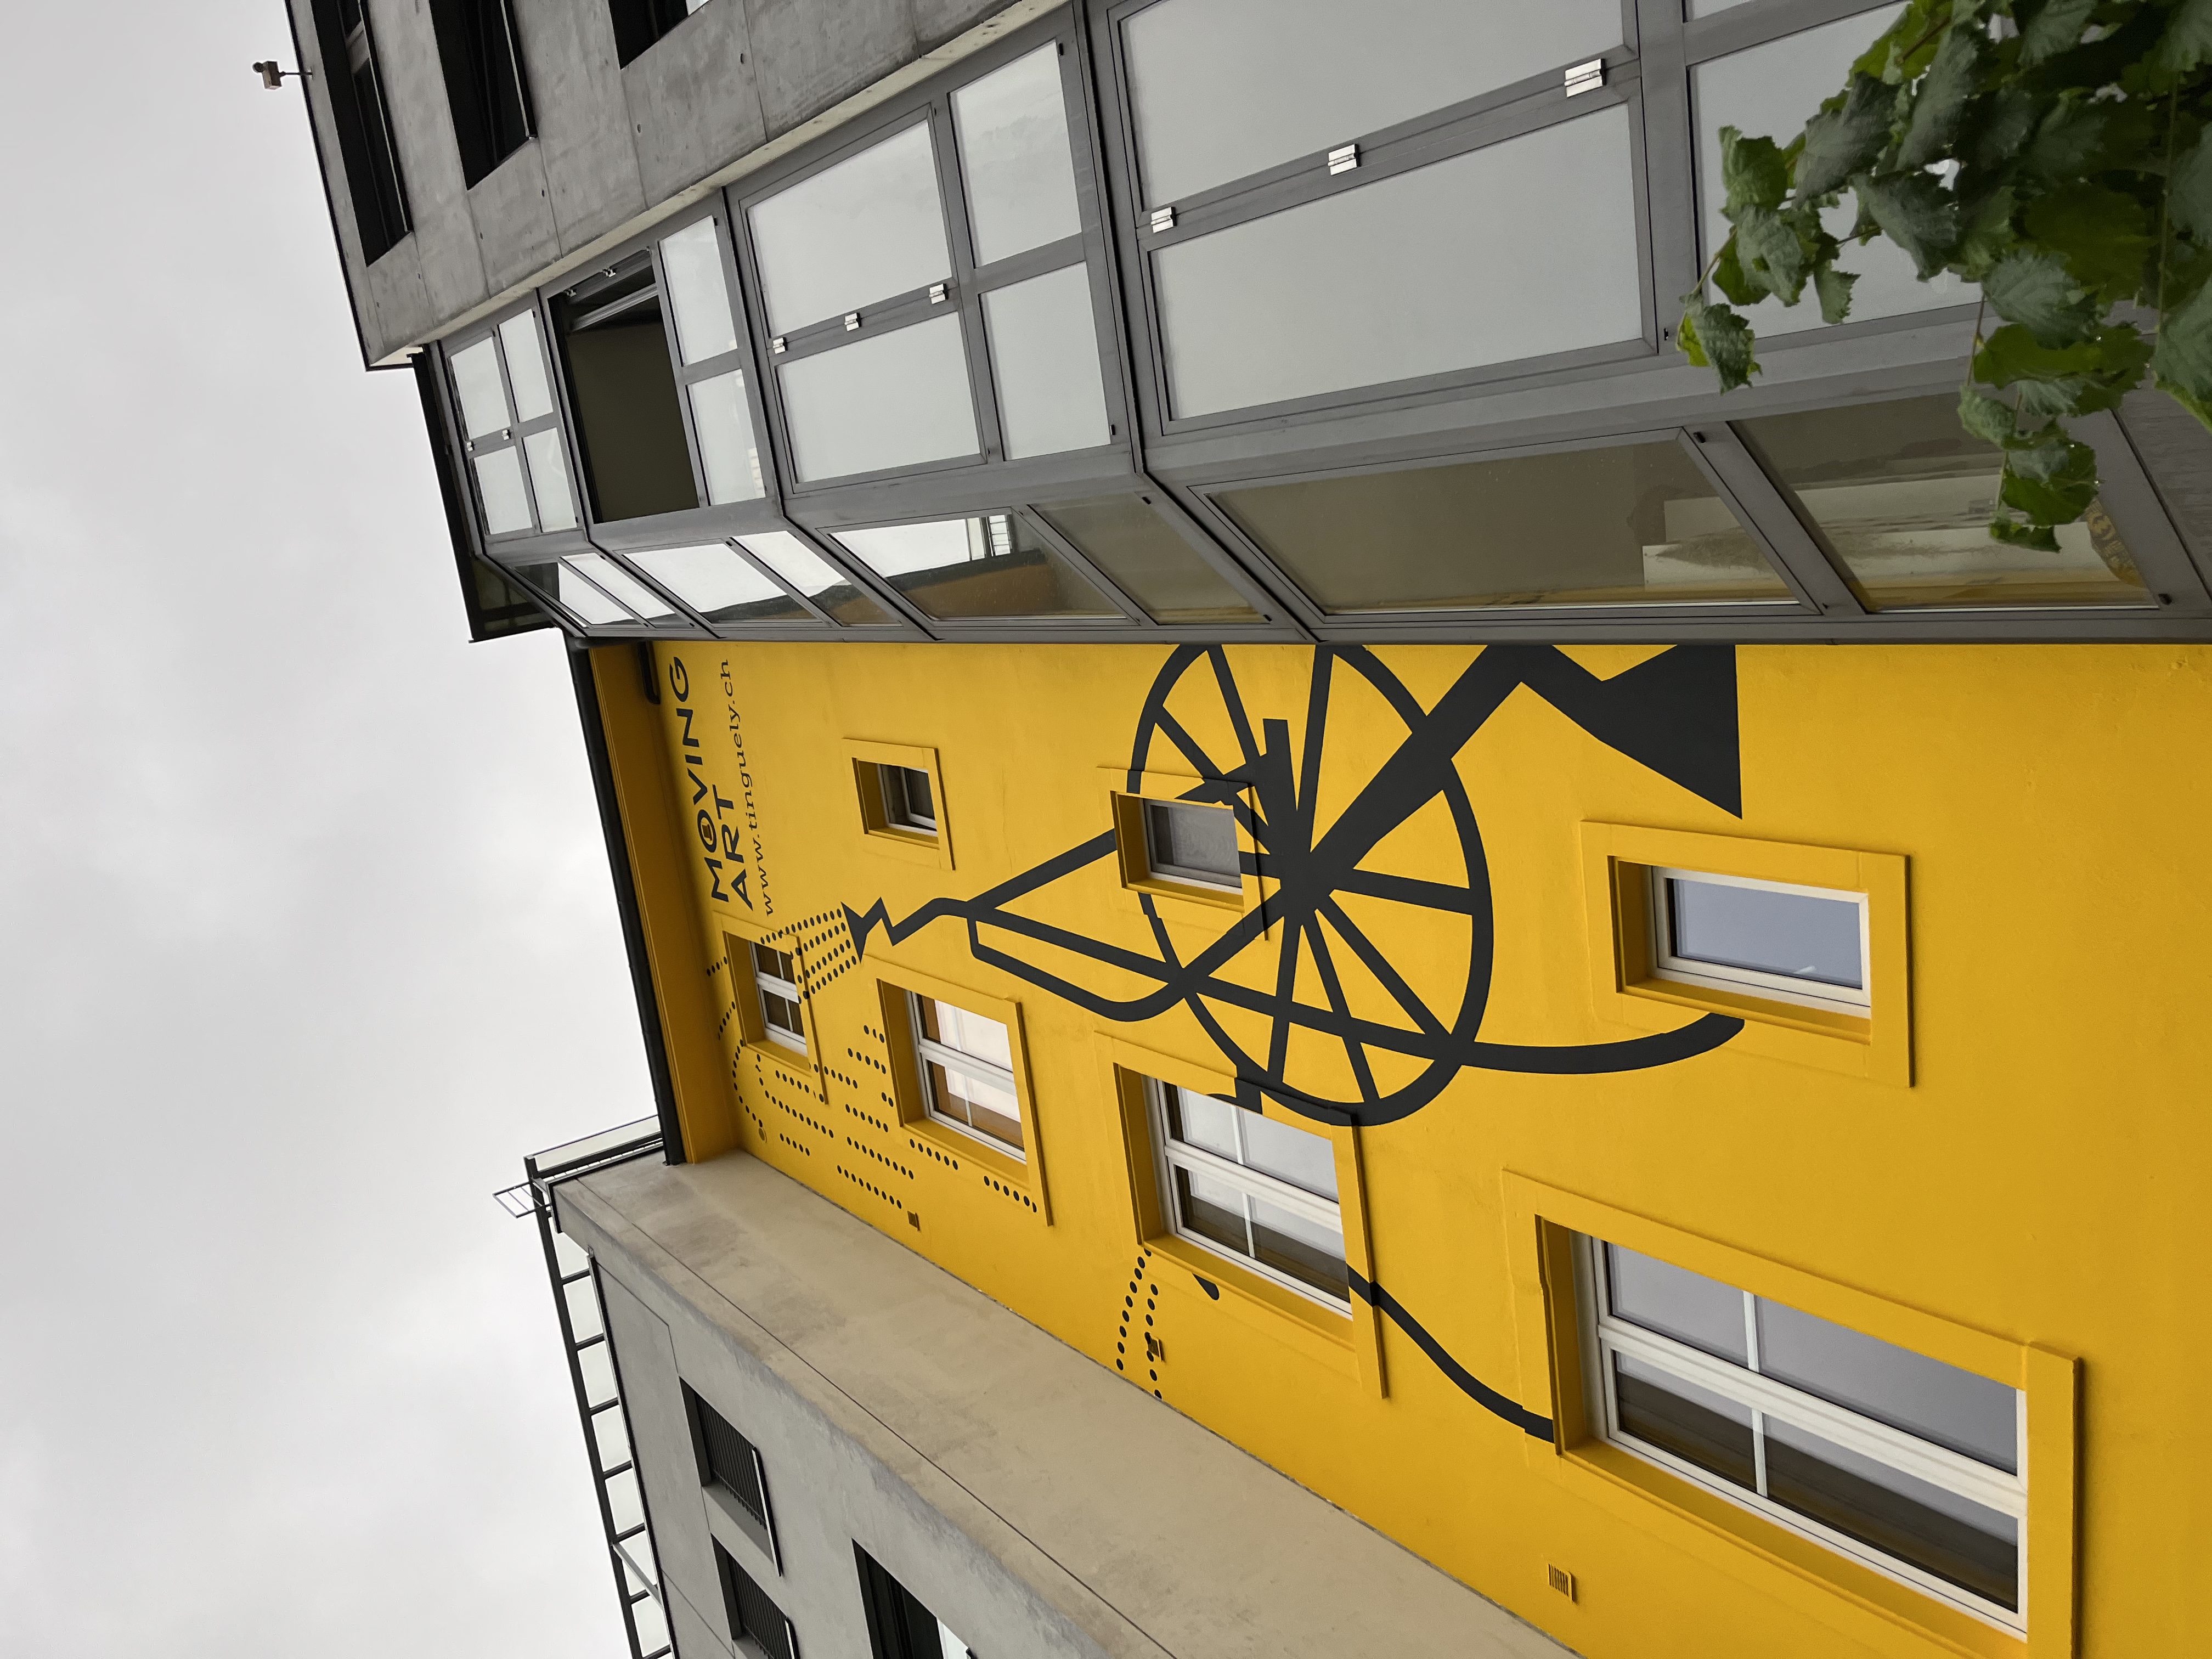 https://sarahweishaupt.ch/media/pages/home/illustration-fassade-fuer-museum-tinguely/9e0a67ce37-1656364119/3627dabe-d8cf-46c8-b0ba-add298770446.jpeg